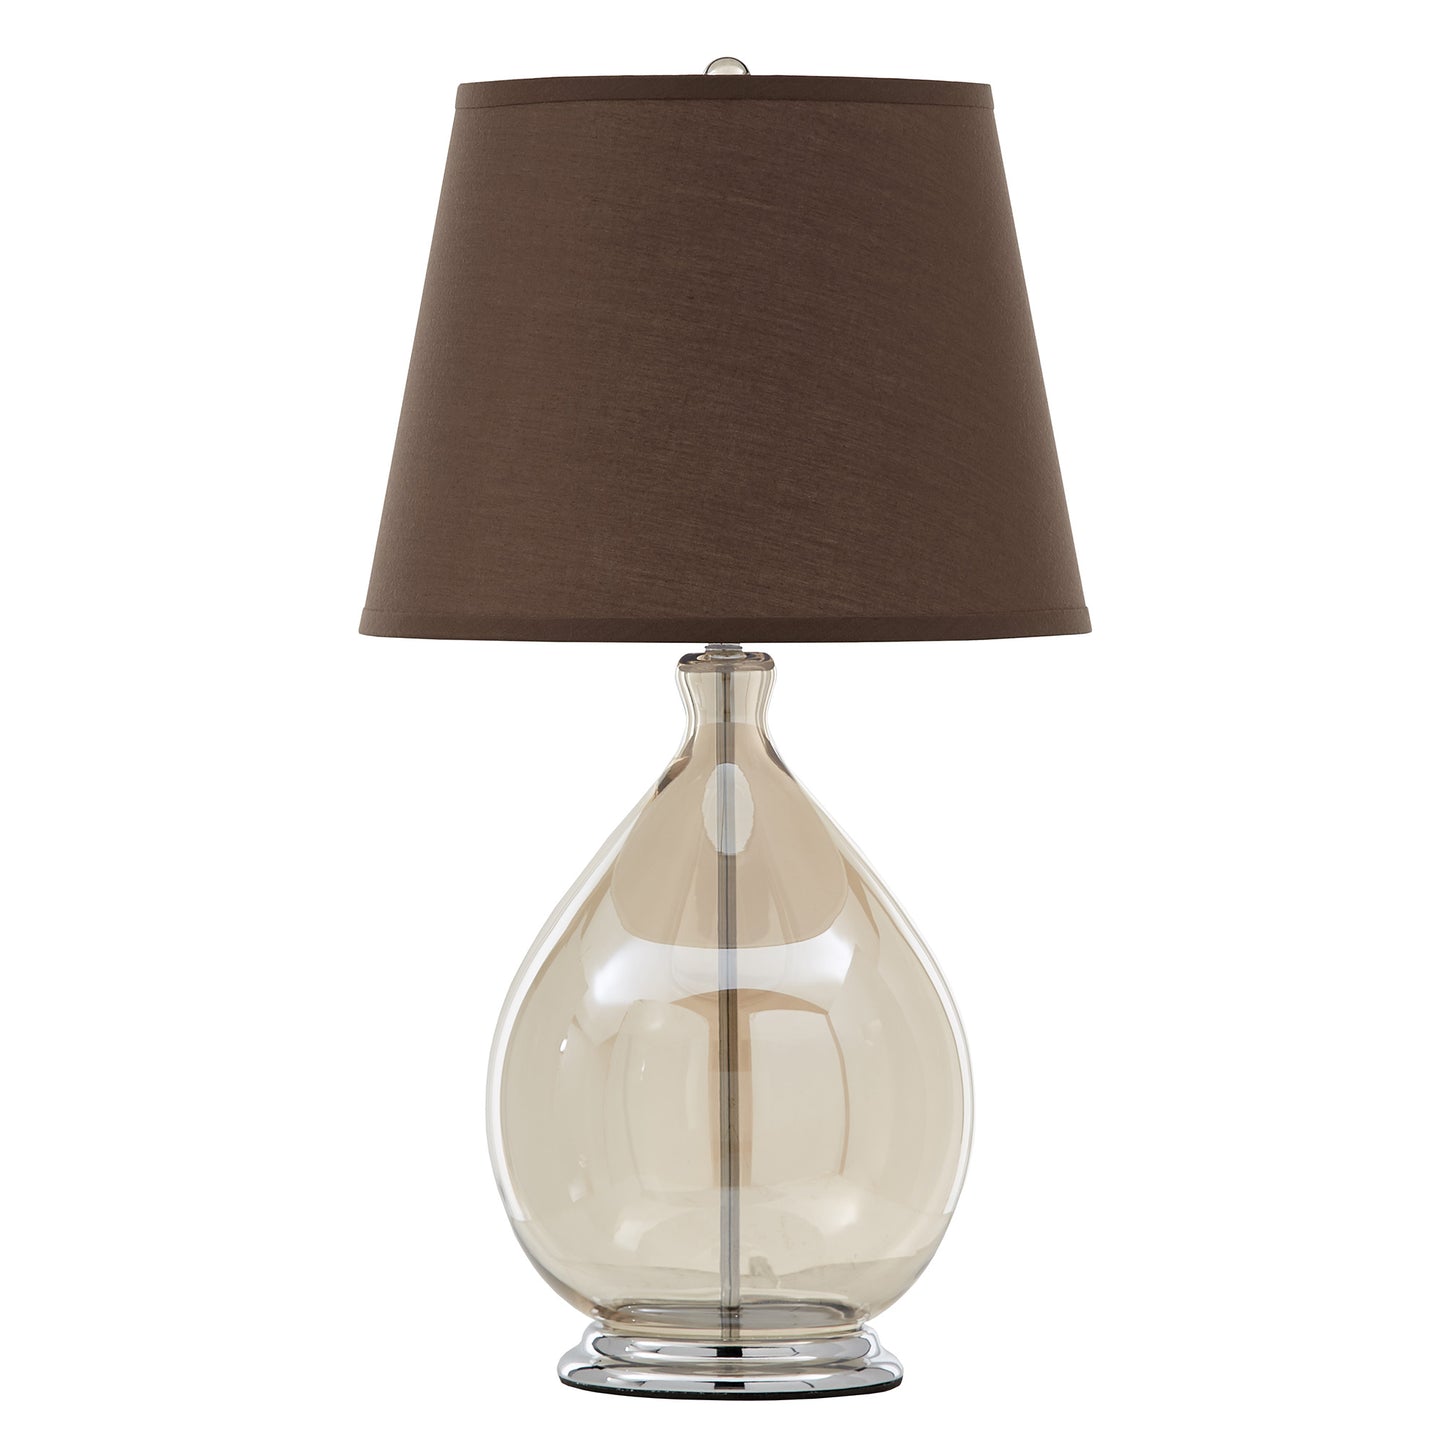 Glass Table Lamp - Amber Brown